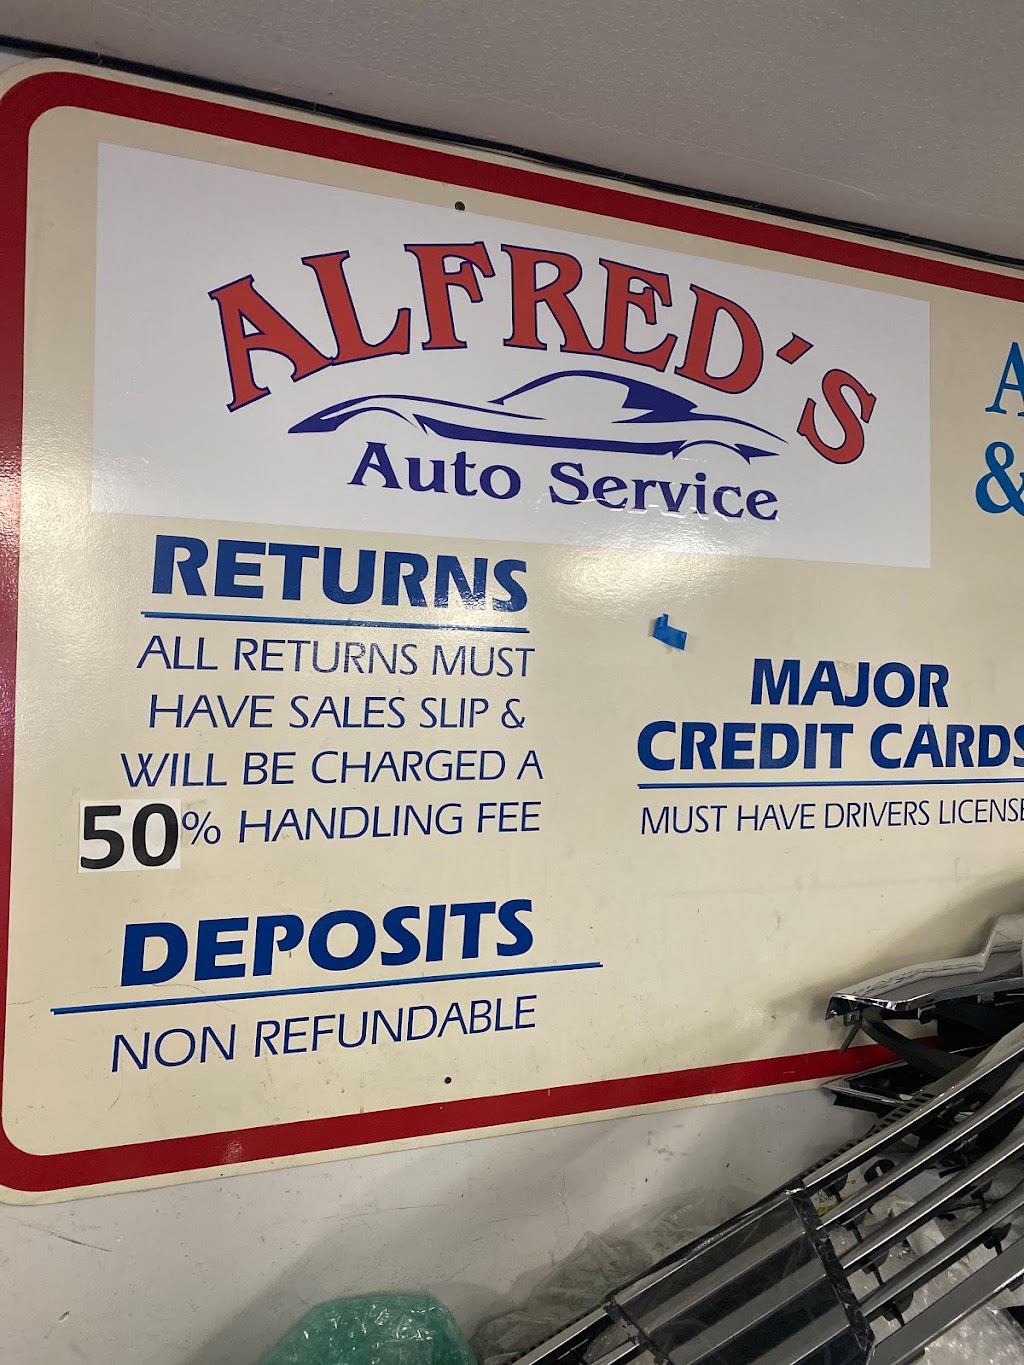 Alfred’s Auto Works & Recycling | 299 Cedar St, Allentown, PA 18102 | Phone: (610) 437-9600